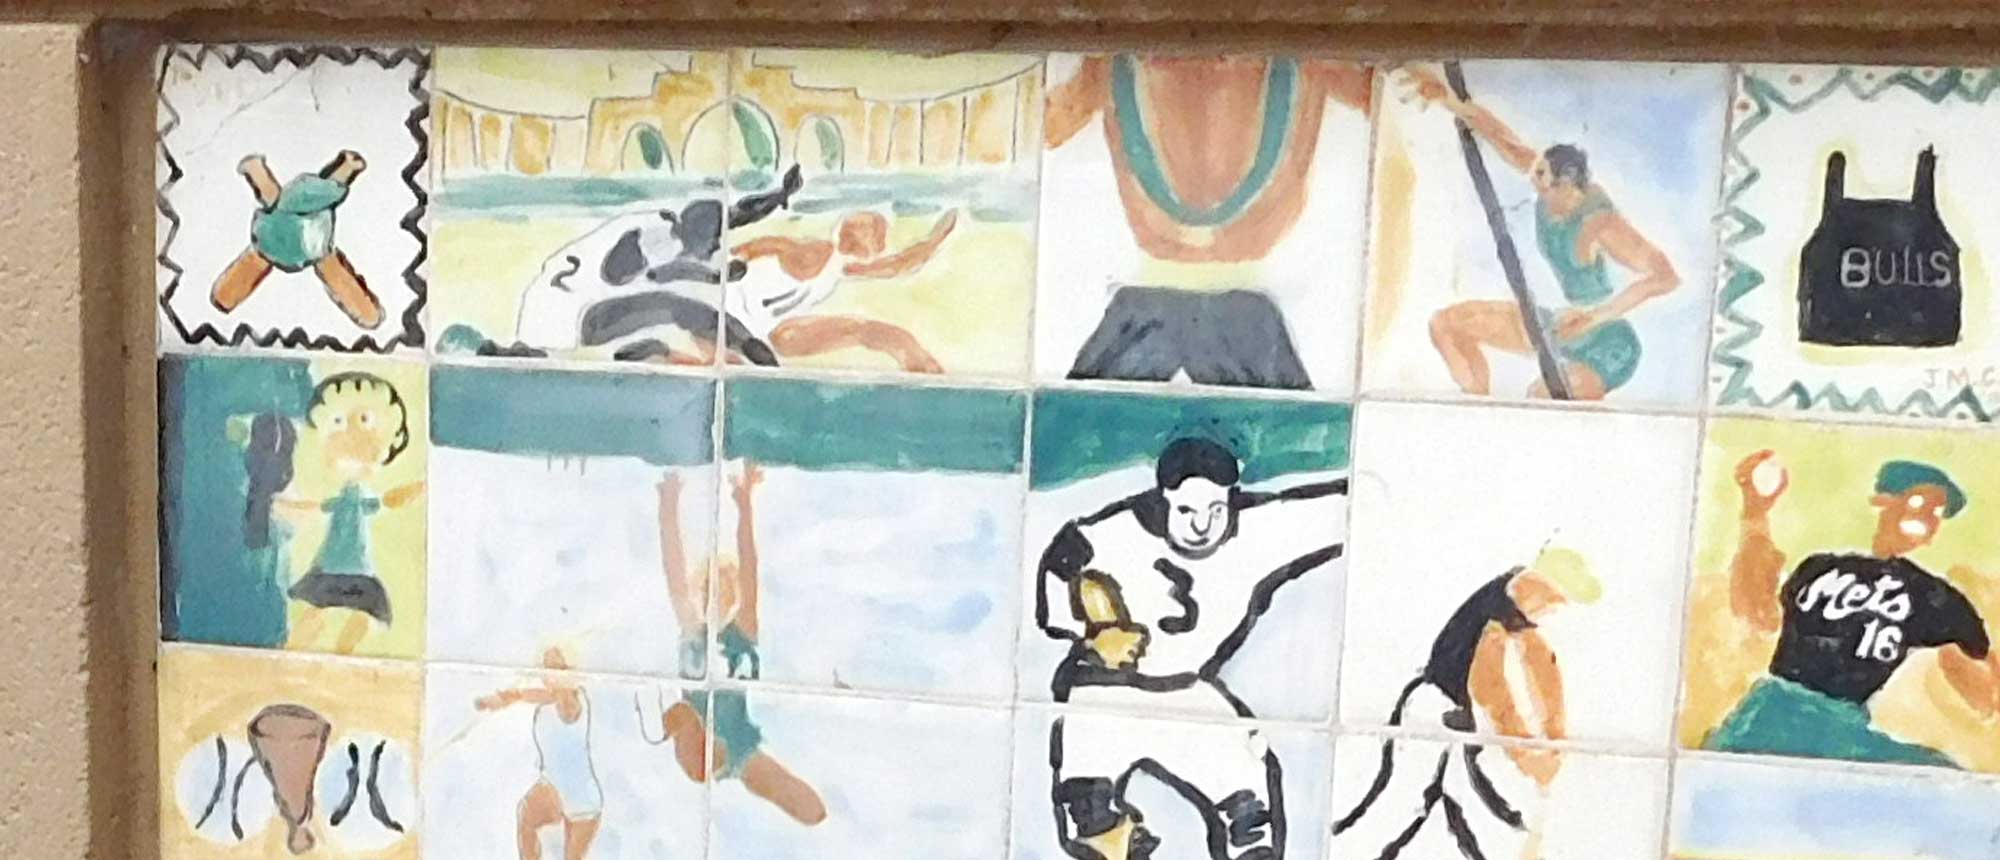 A tile mural depicting athletes doing various sports